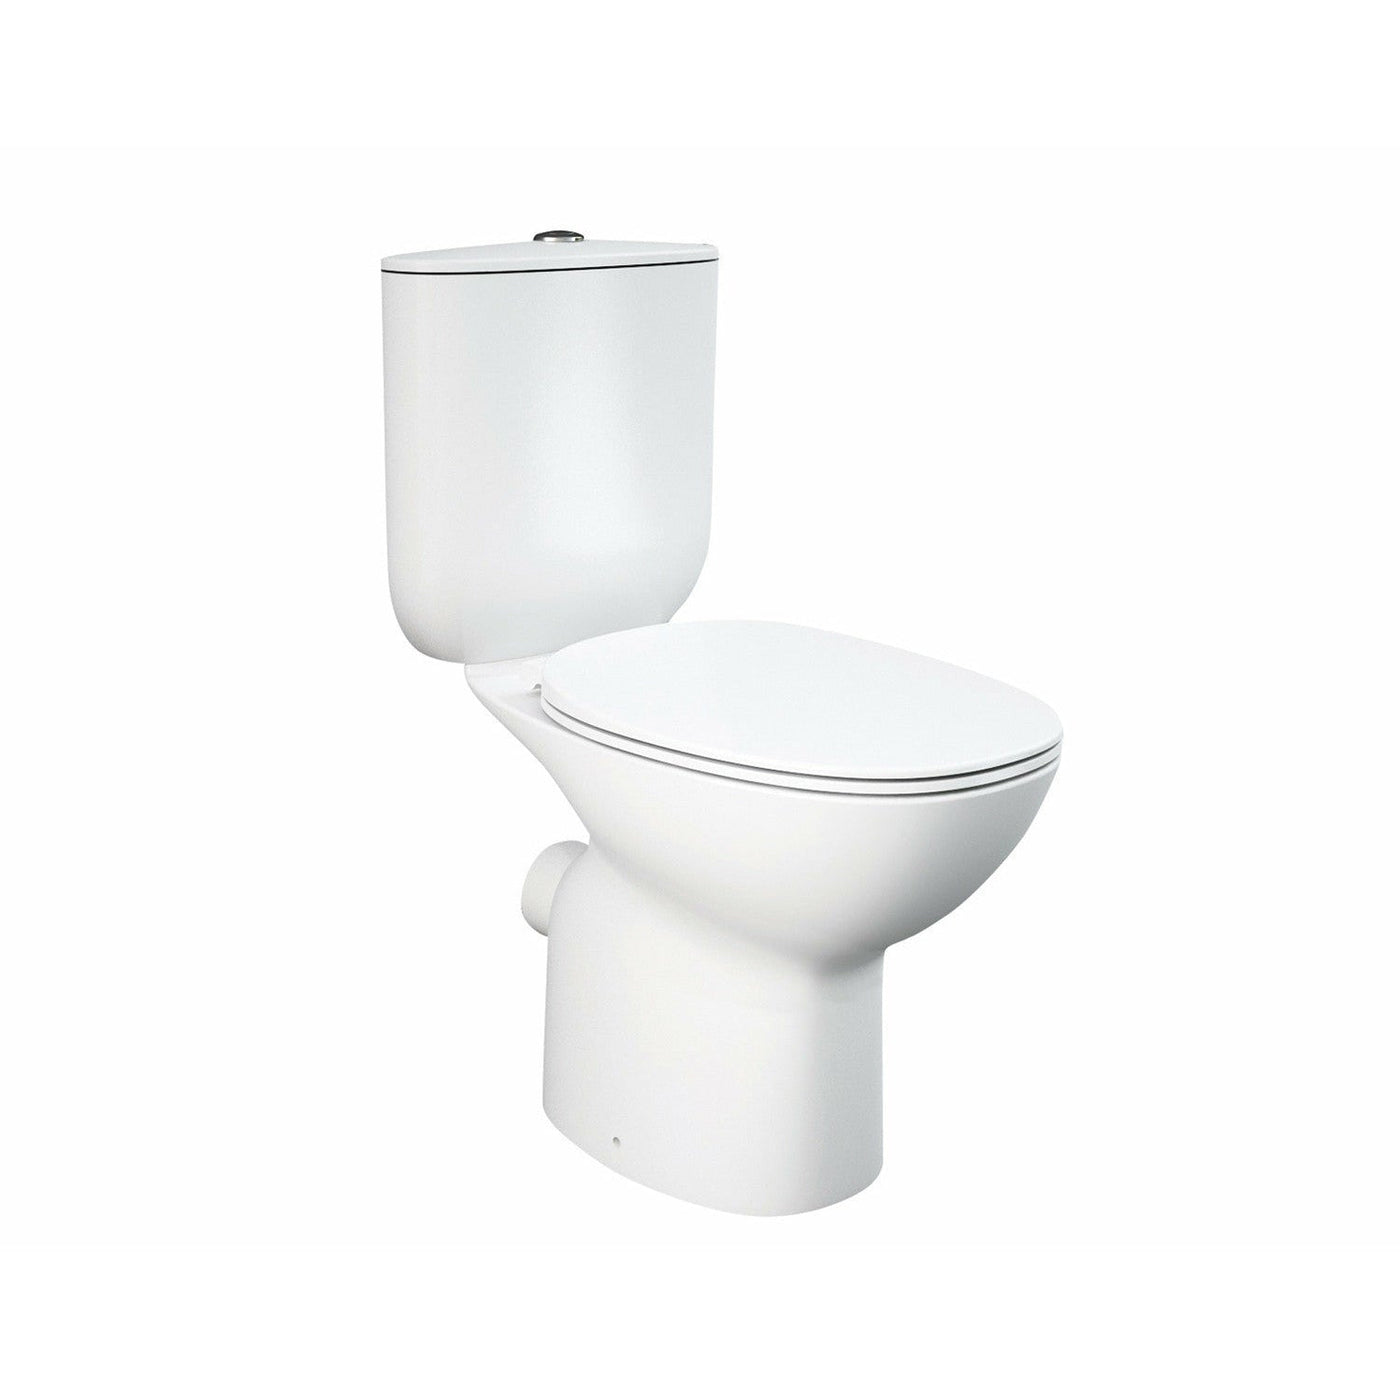 Frontline Morning Close Coupled Toilet with Soft-Close Seat - Letta London - 